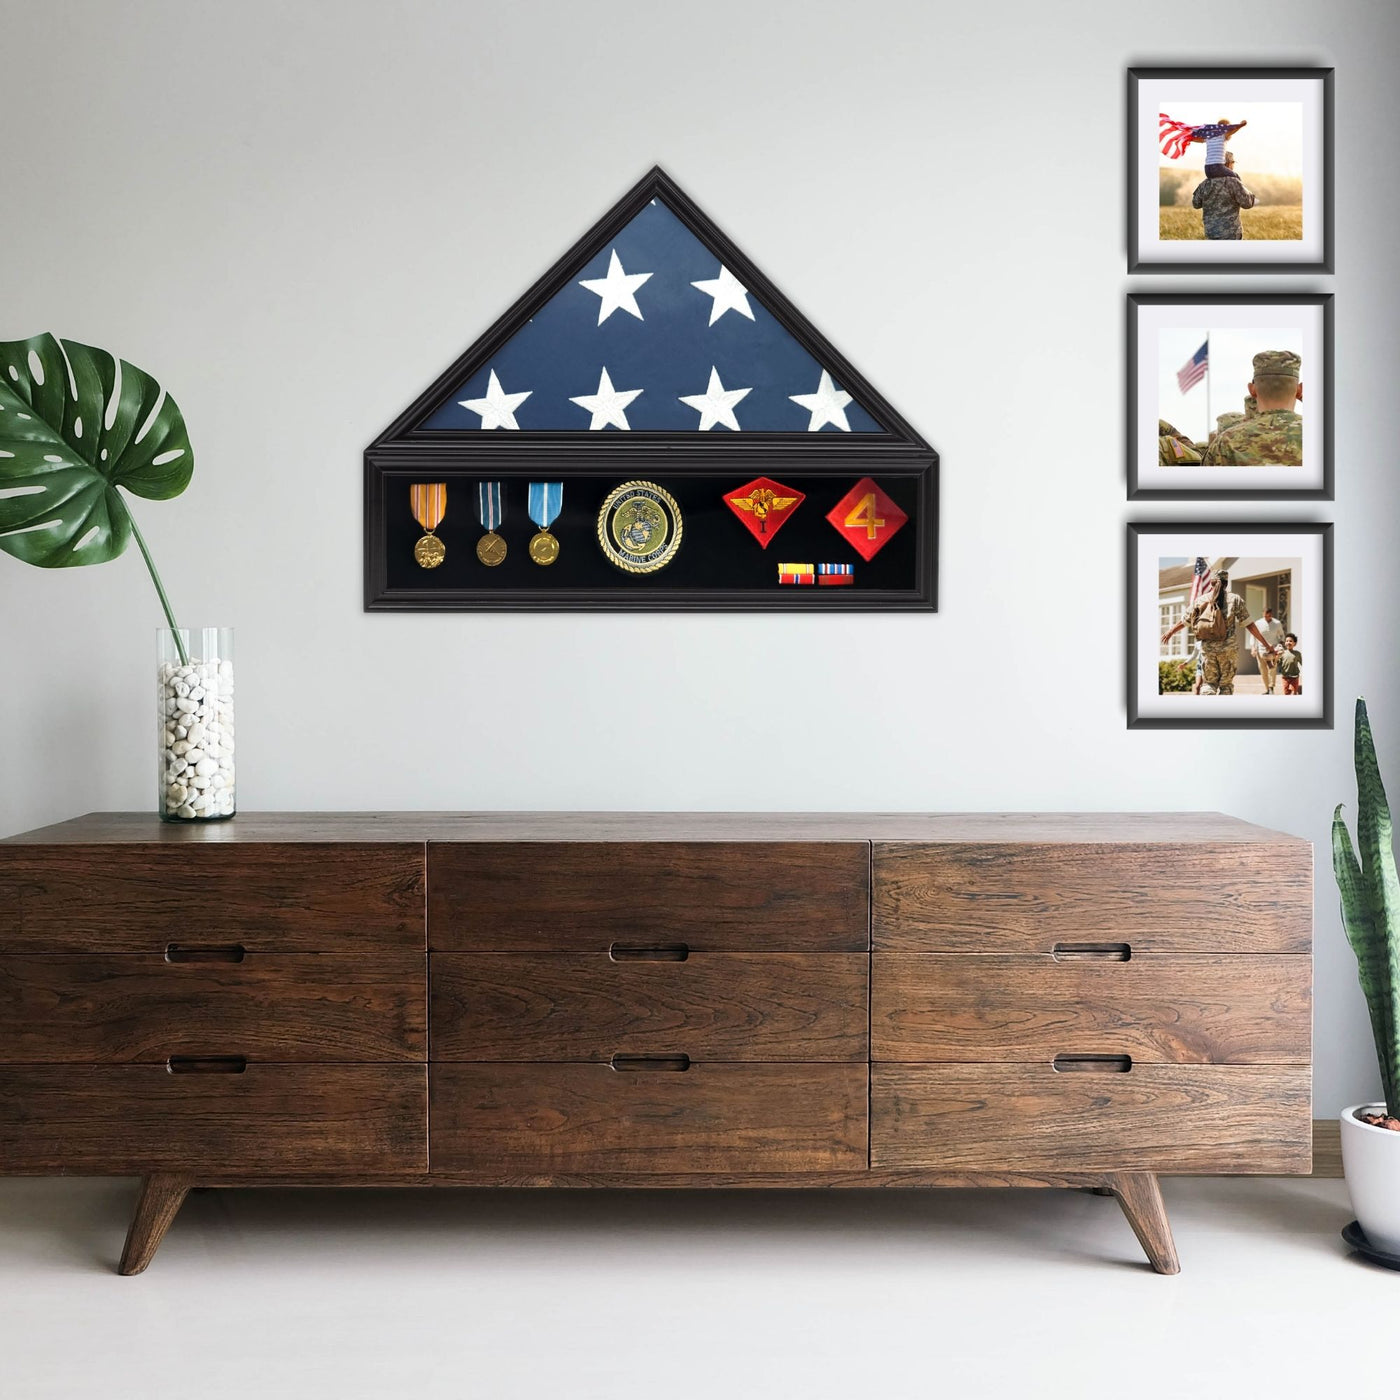 Military Shadow Box Display Case for Funeral Burial Flag for American Veterans Fits Folded 5x9.5’ Flag, Medal, Patches. Solid Wood and Glass.